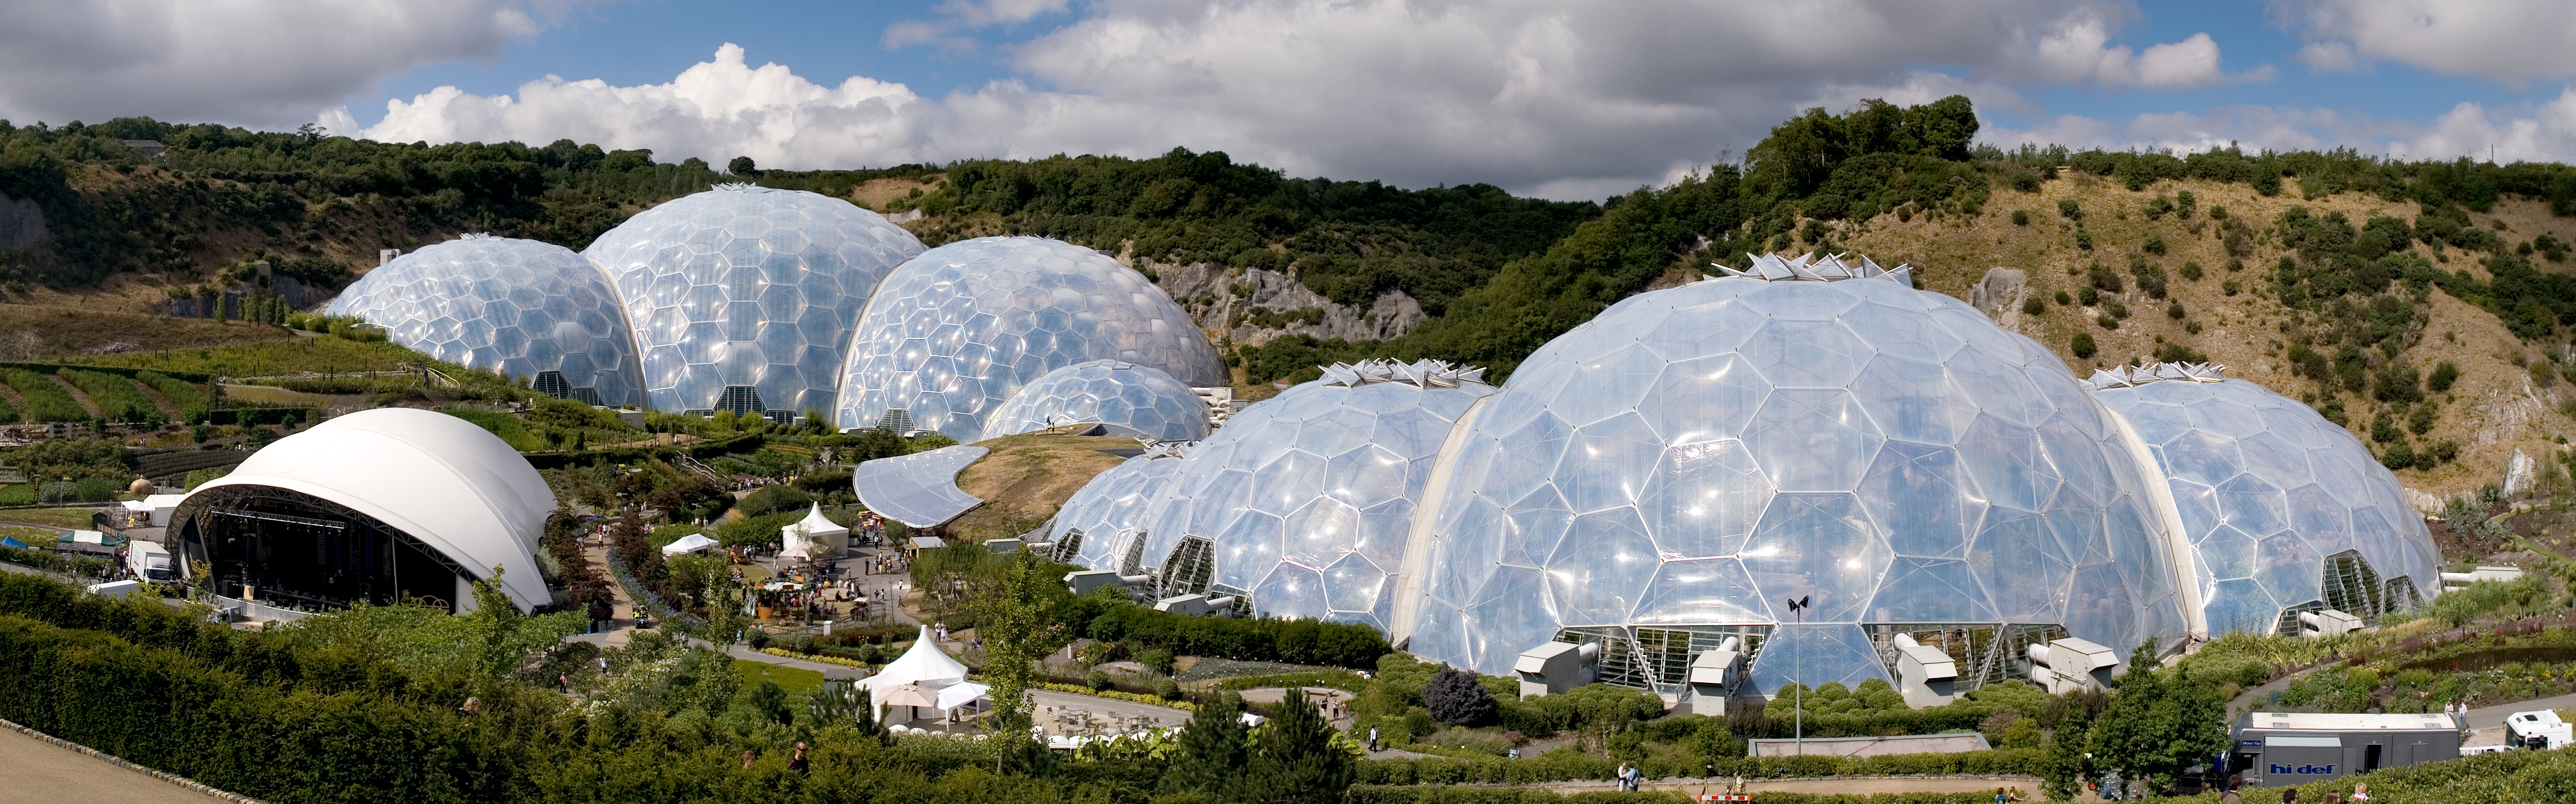 Eden_Project_geodesic_domes_panorama.jpg